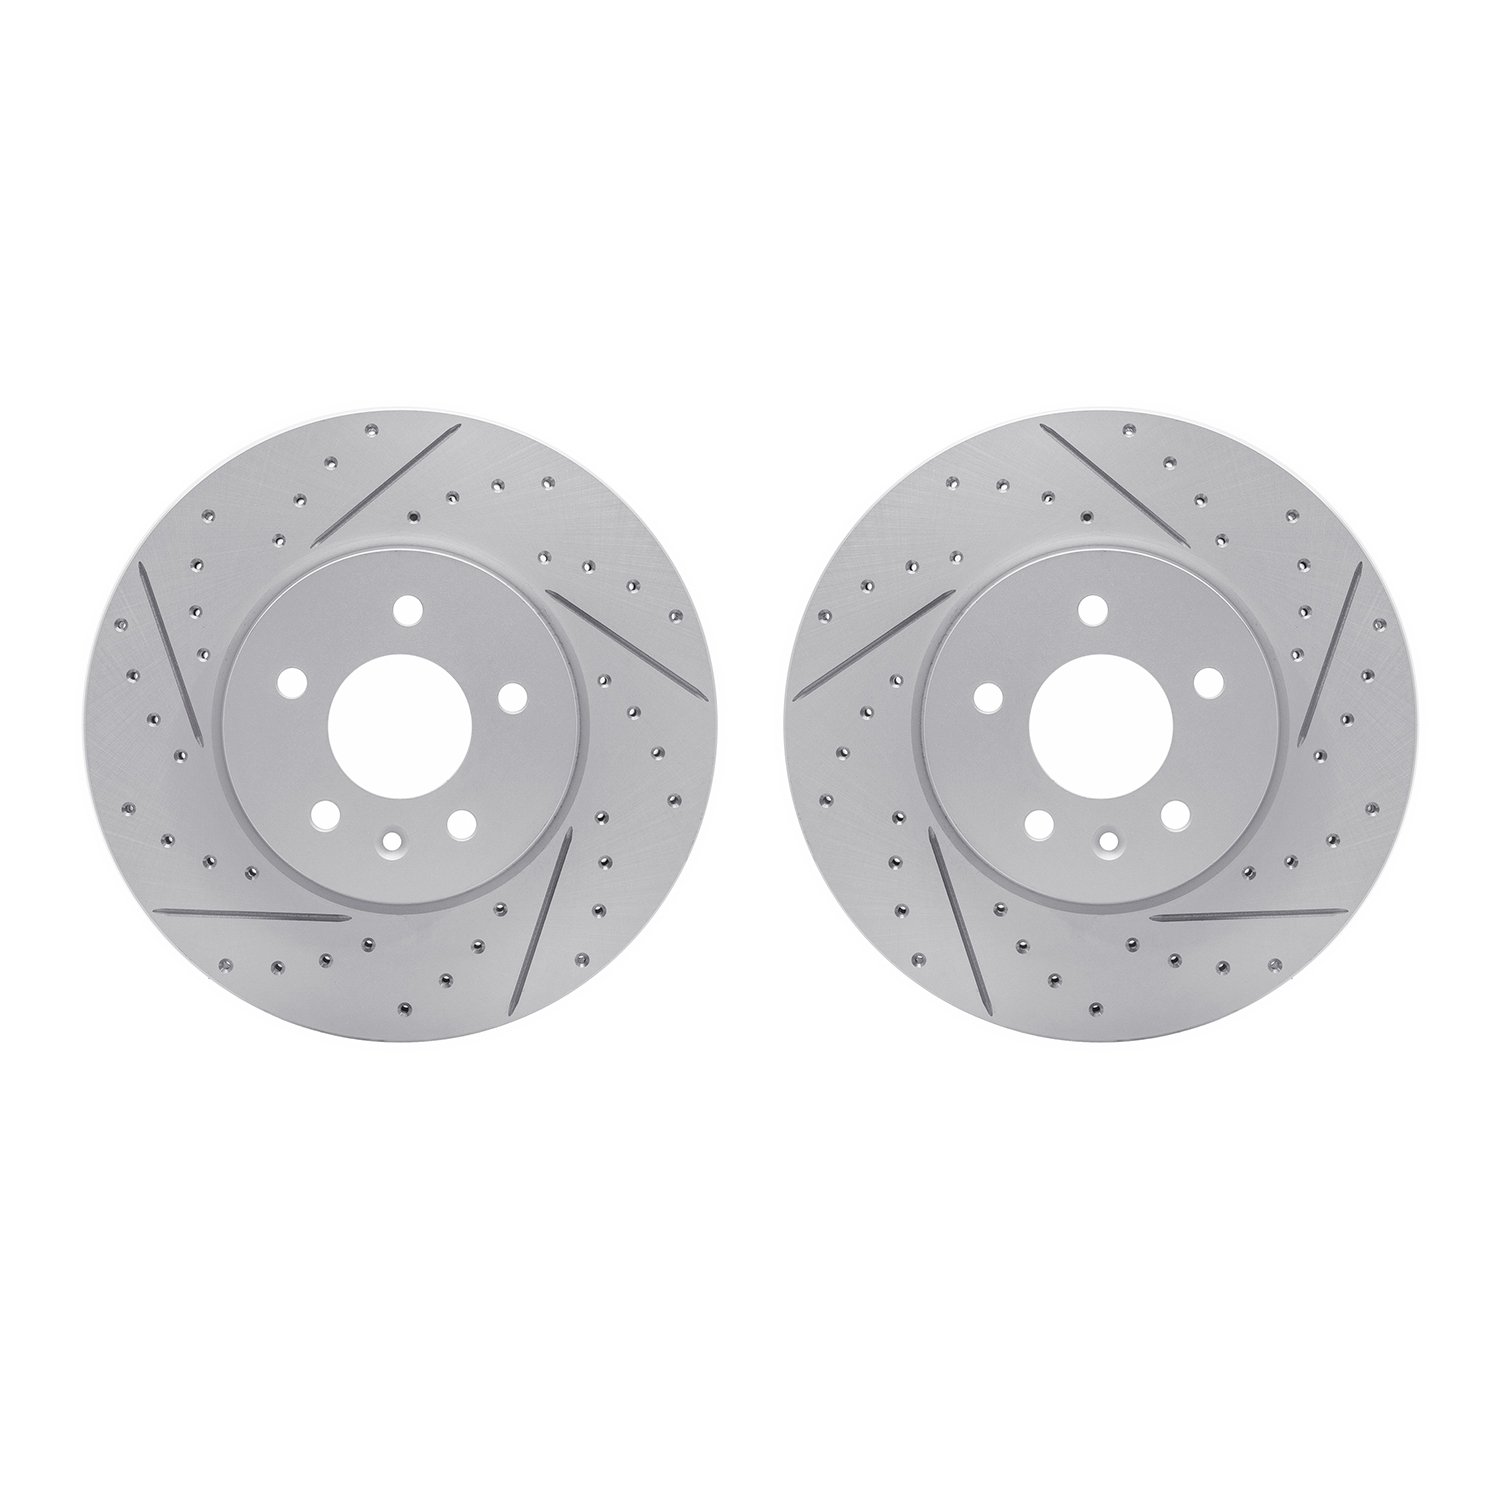 2002-46005 Geoperformance Drilled/Slotted Brake Rotors, Fits Select GM, Position: Front